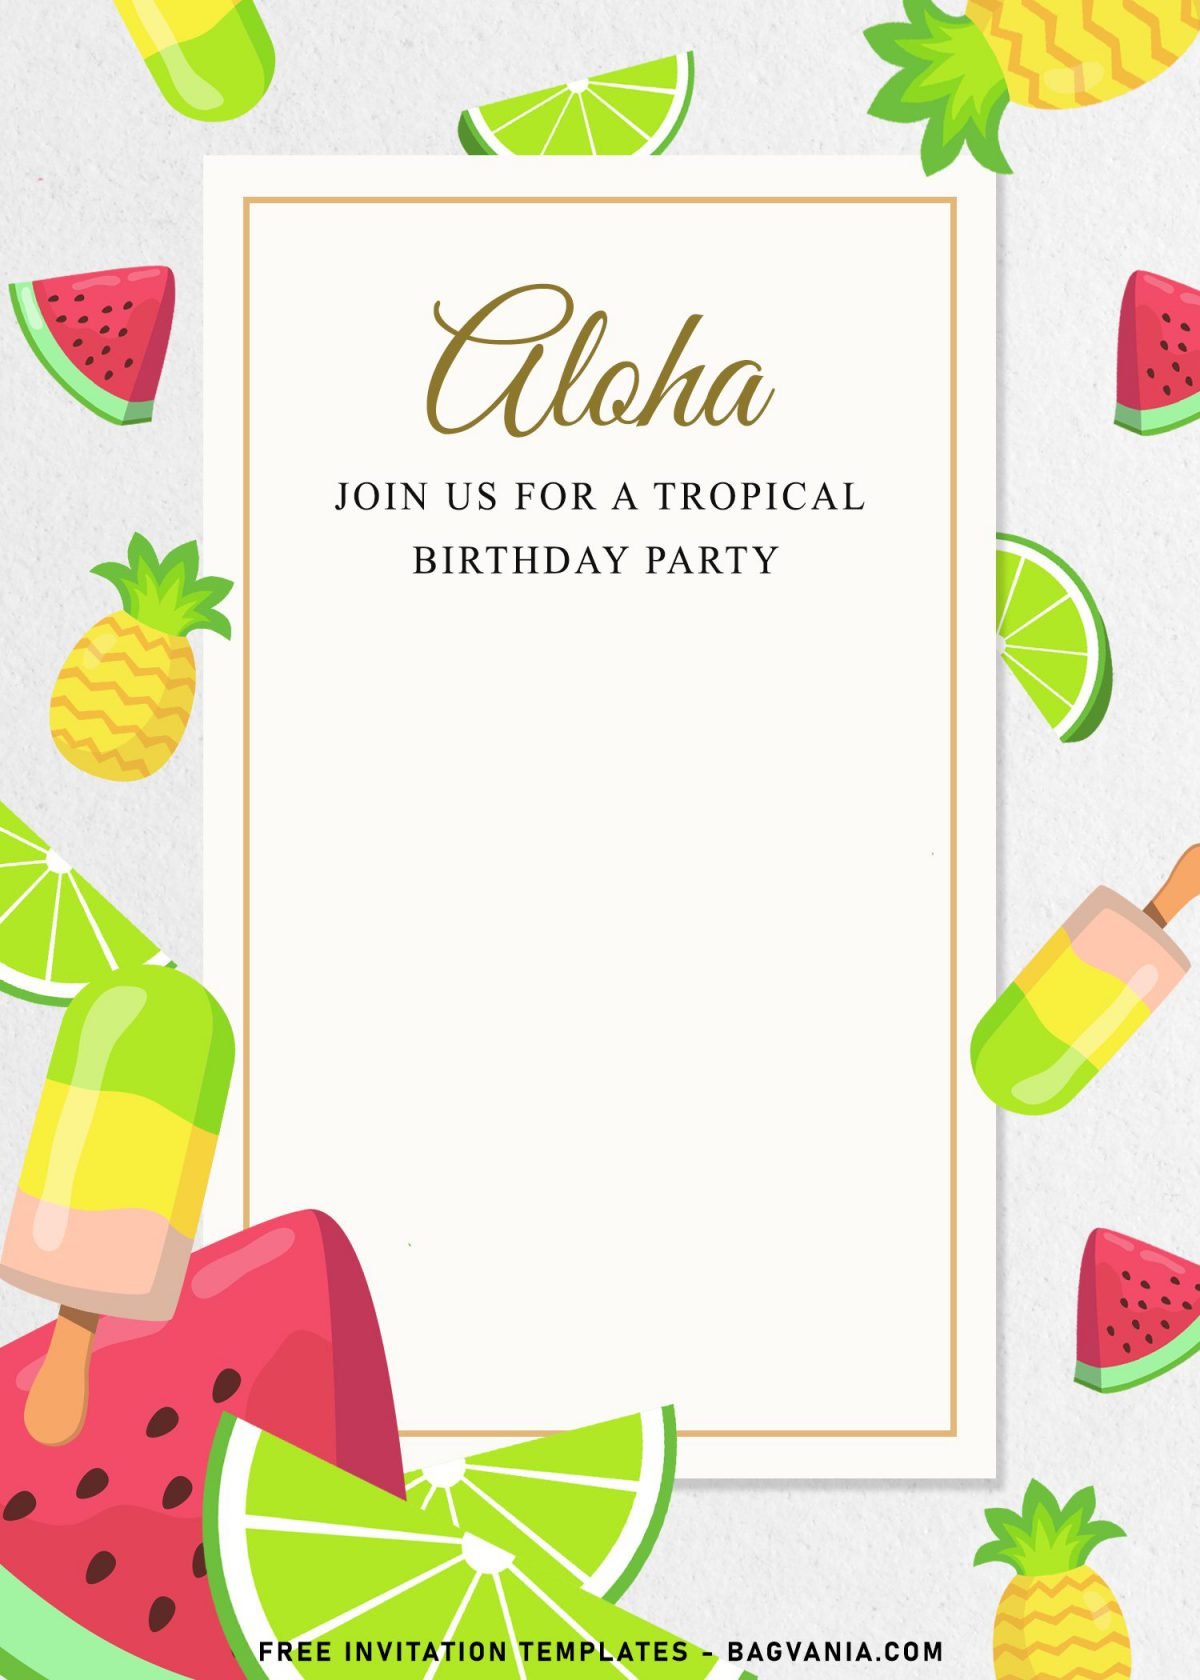 7+ Best Tropical Birthday Invitation Templates To Celebrate Your Kid's Birthday In Summer and has Pineapples 